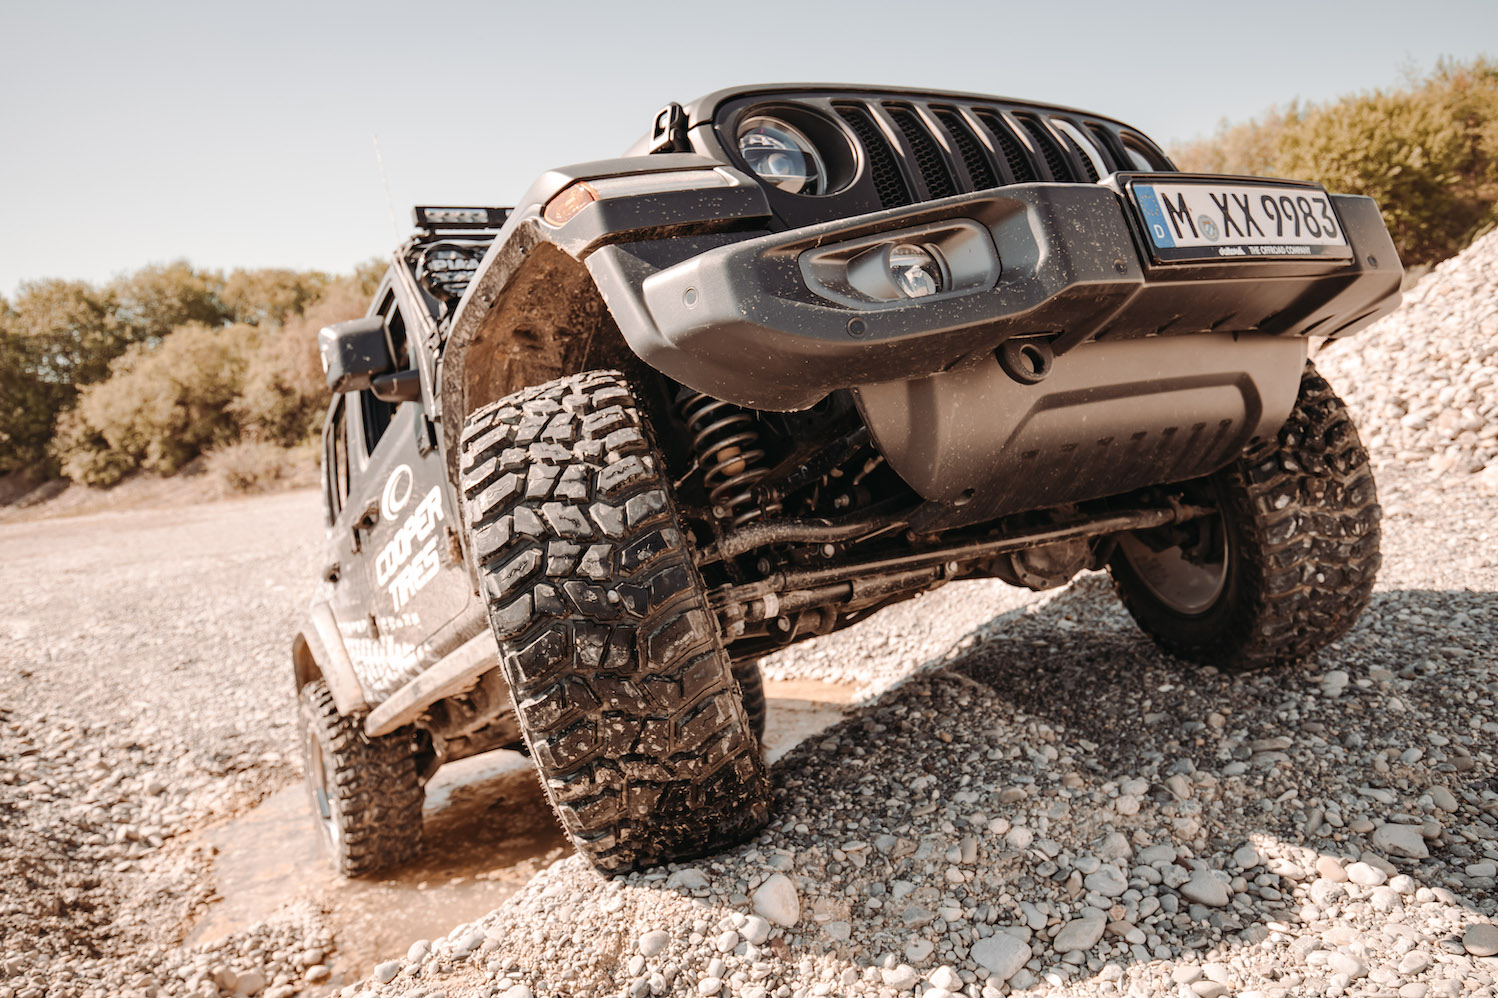 delta4x4 suits up the Jeep Wrangler Rubicon for Cooper Tires | delta4x4